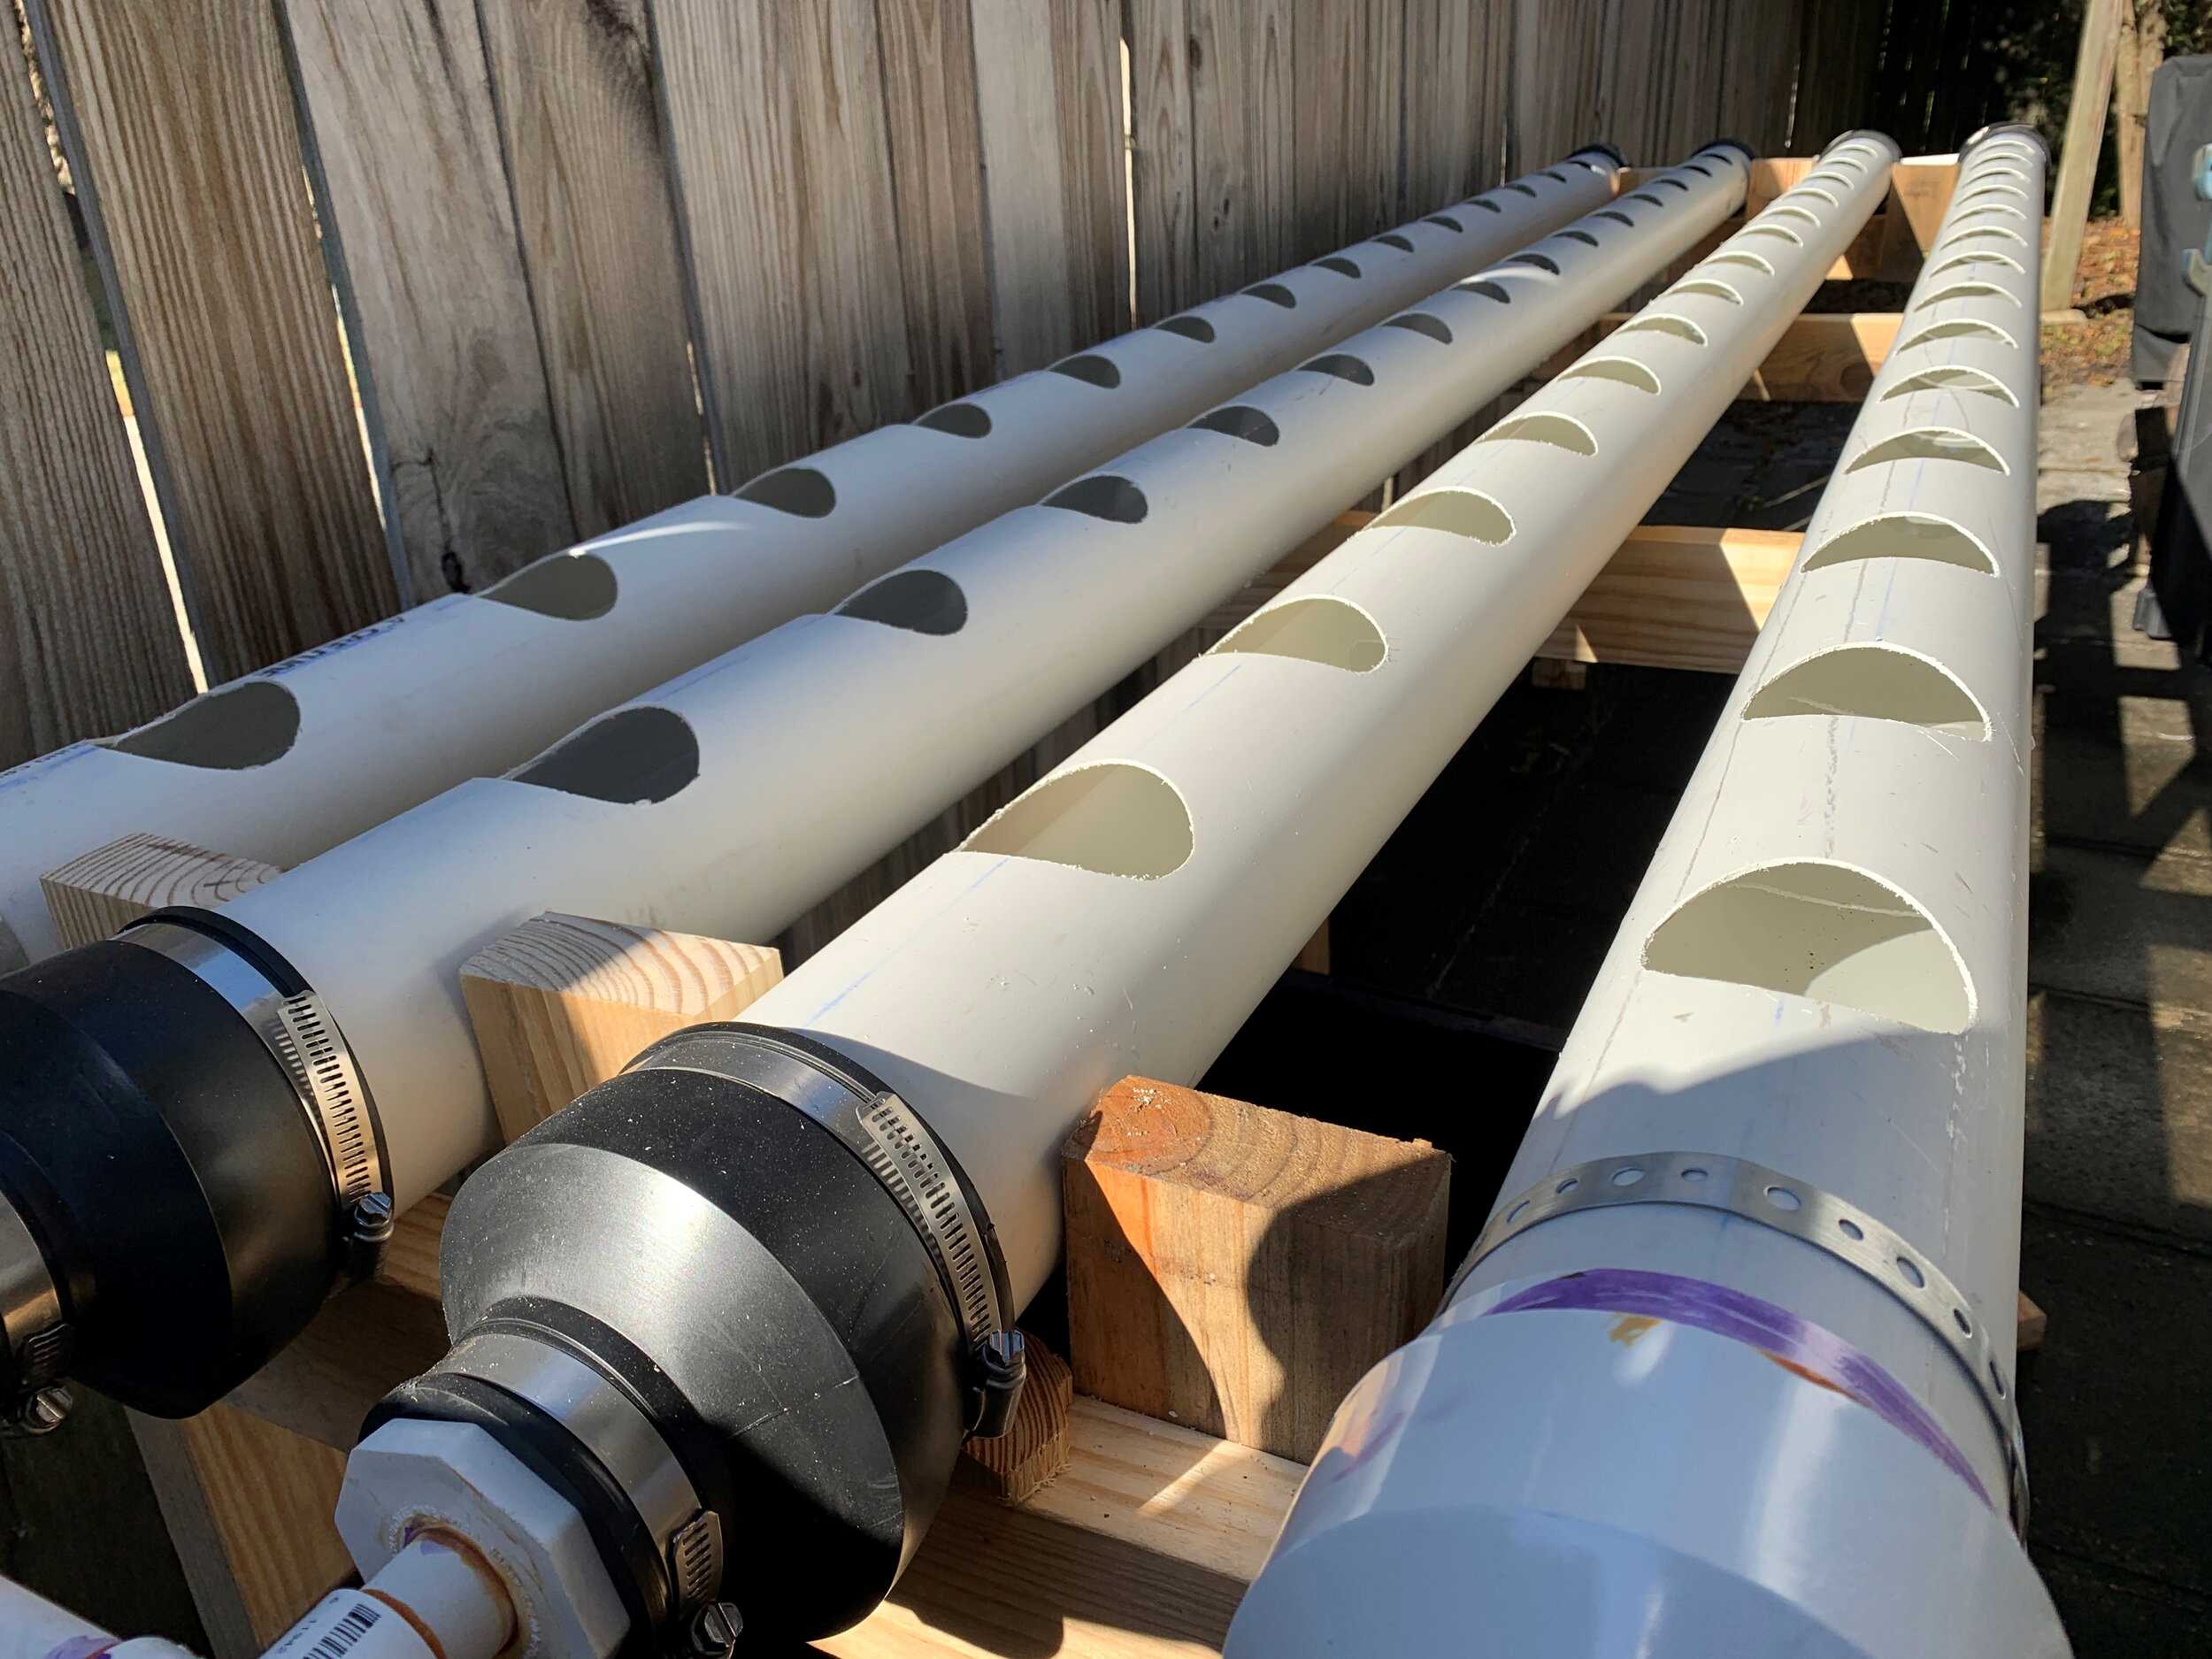 What Size PVC Pipes To Use For Hydroponics